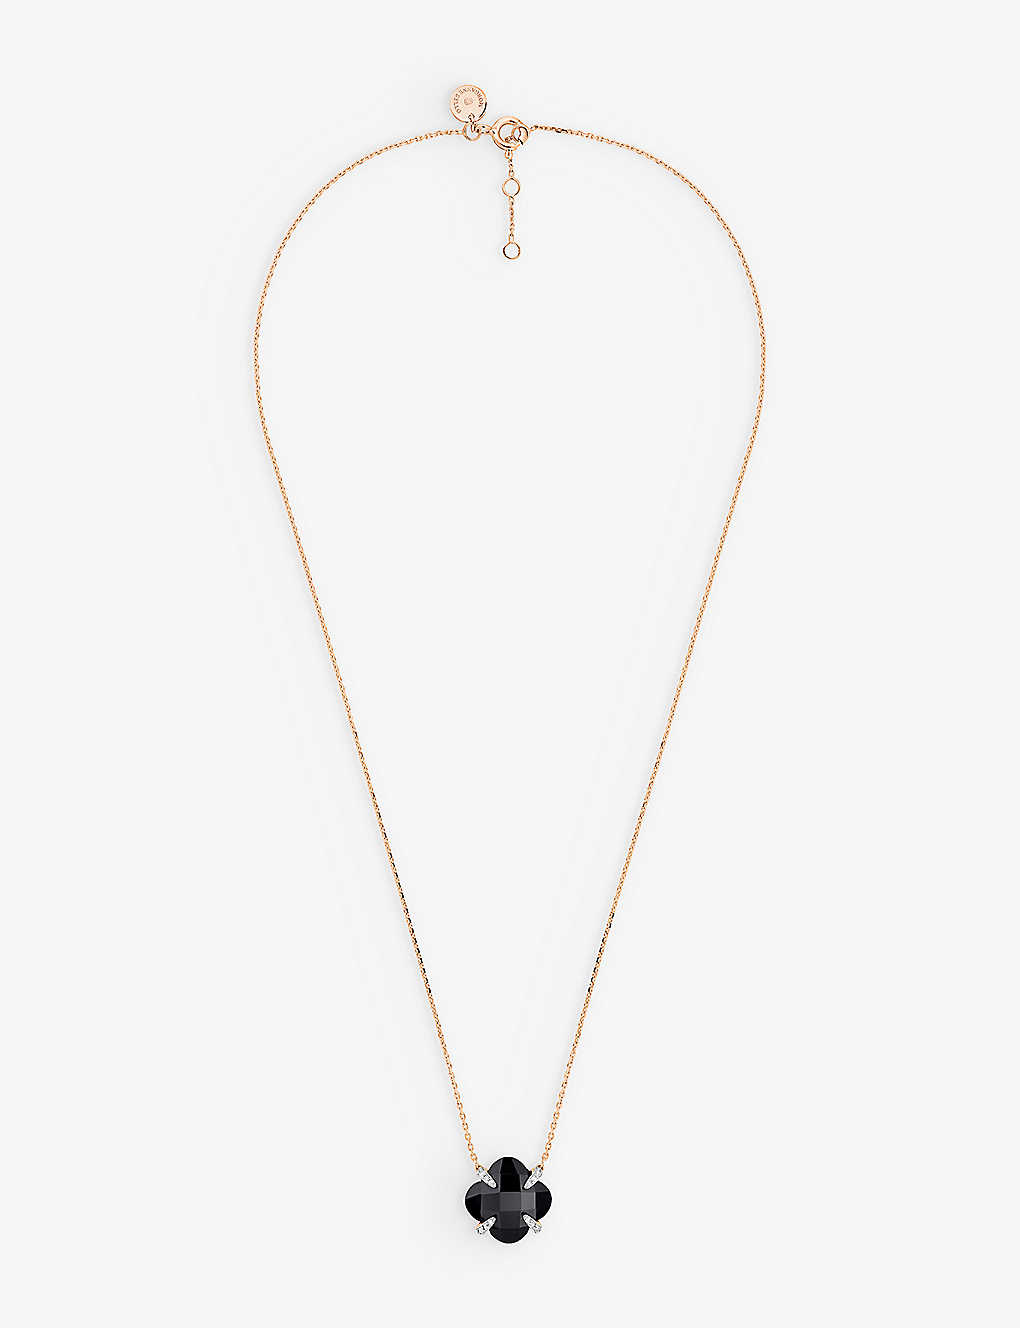 The Alkemistry Womens Rose Gold X Morganne Bello Clover 18ct Rose-gold, Onyx And Diamond Necklace